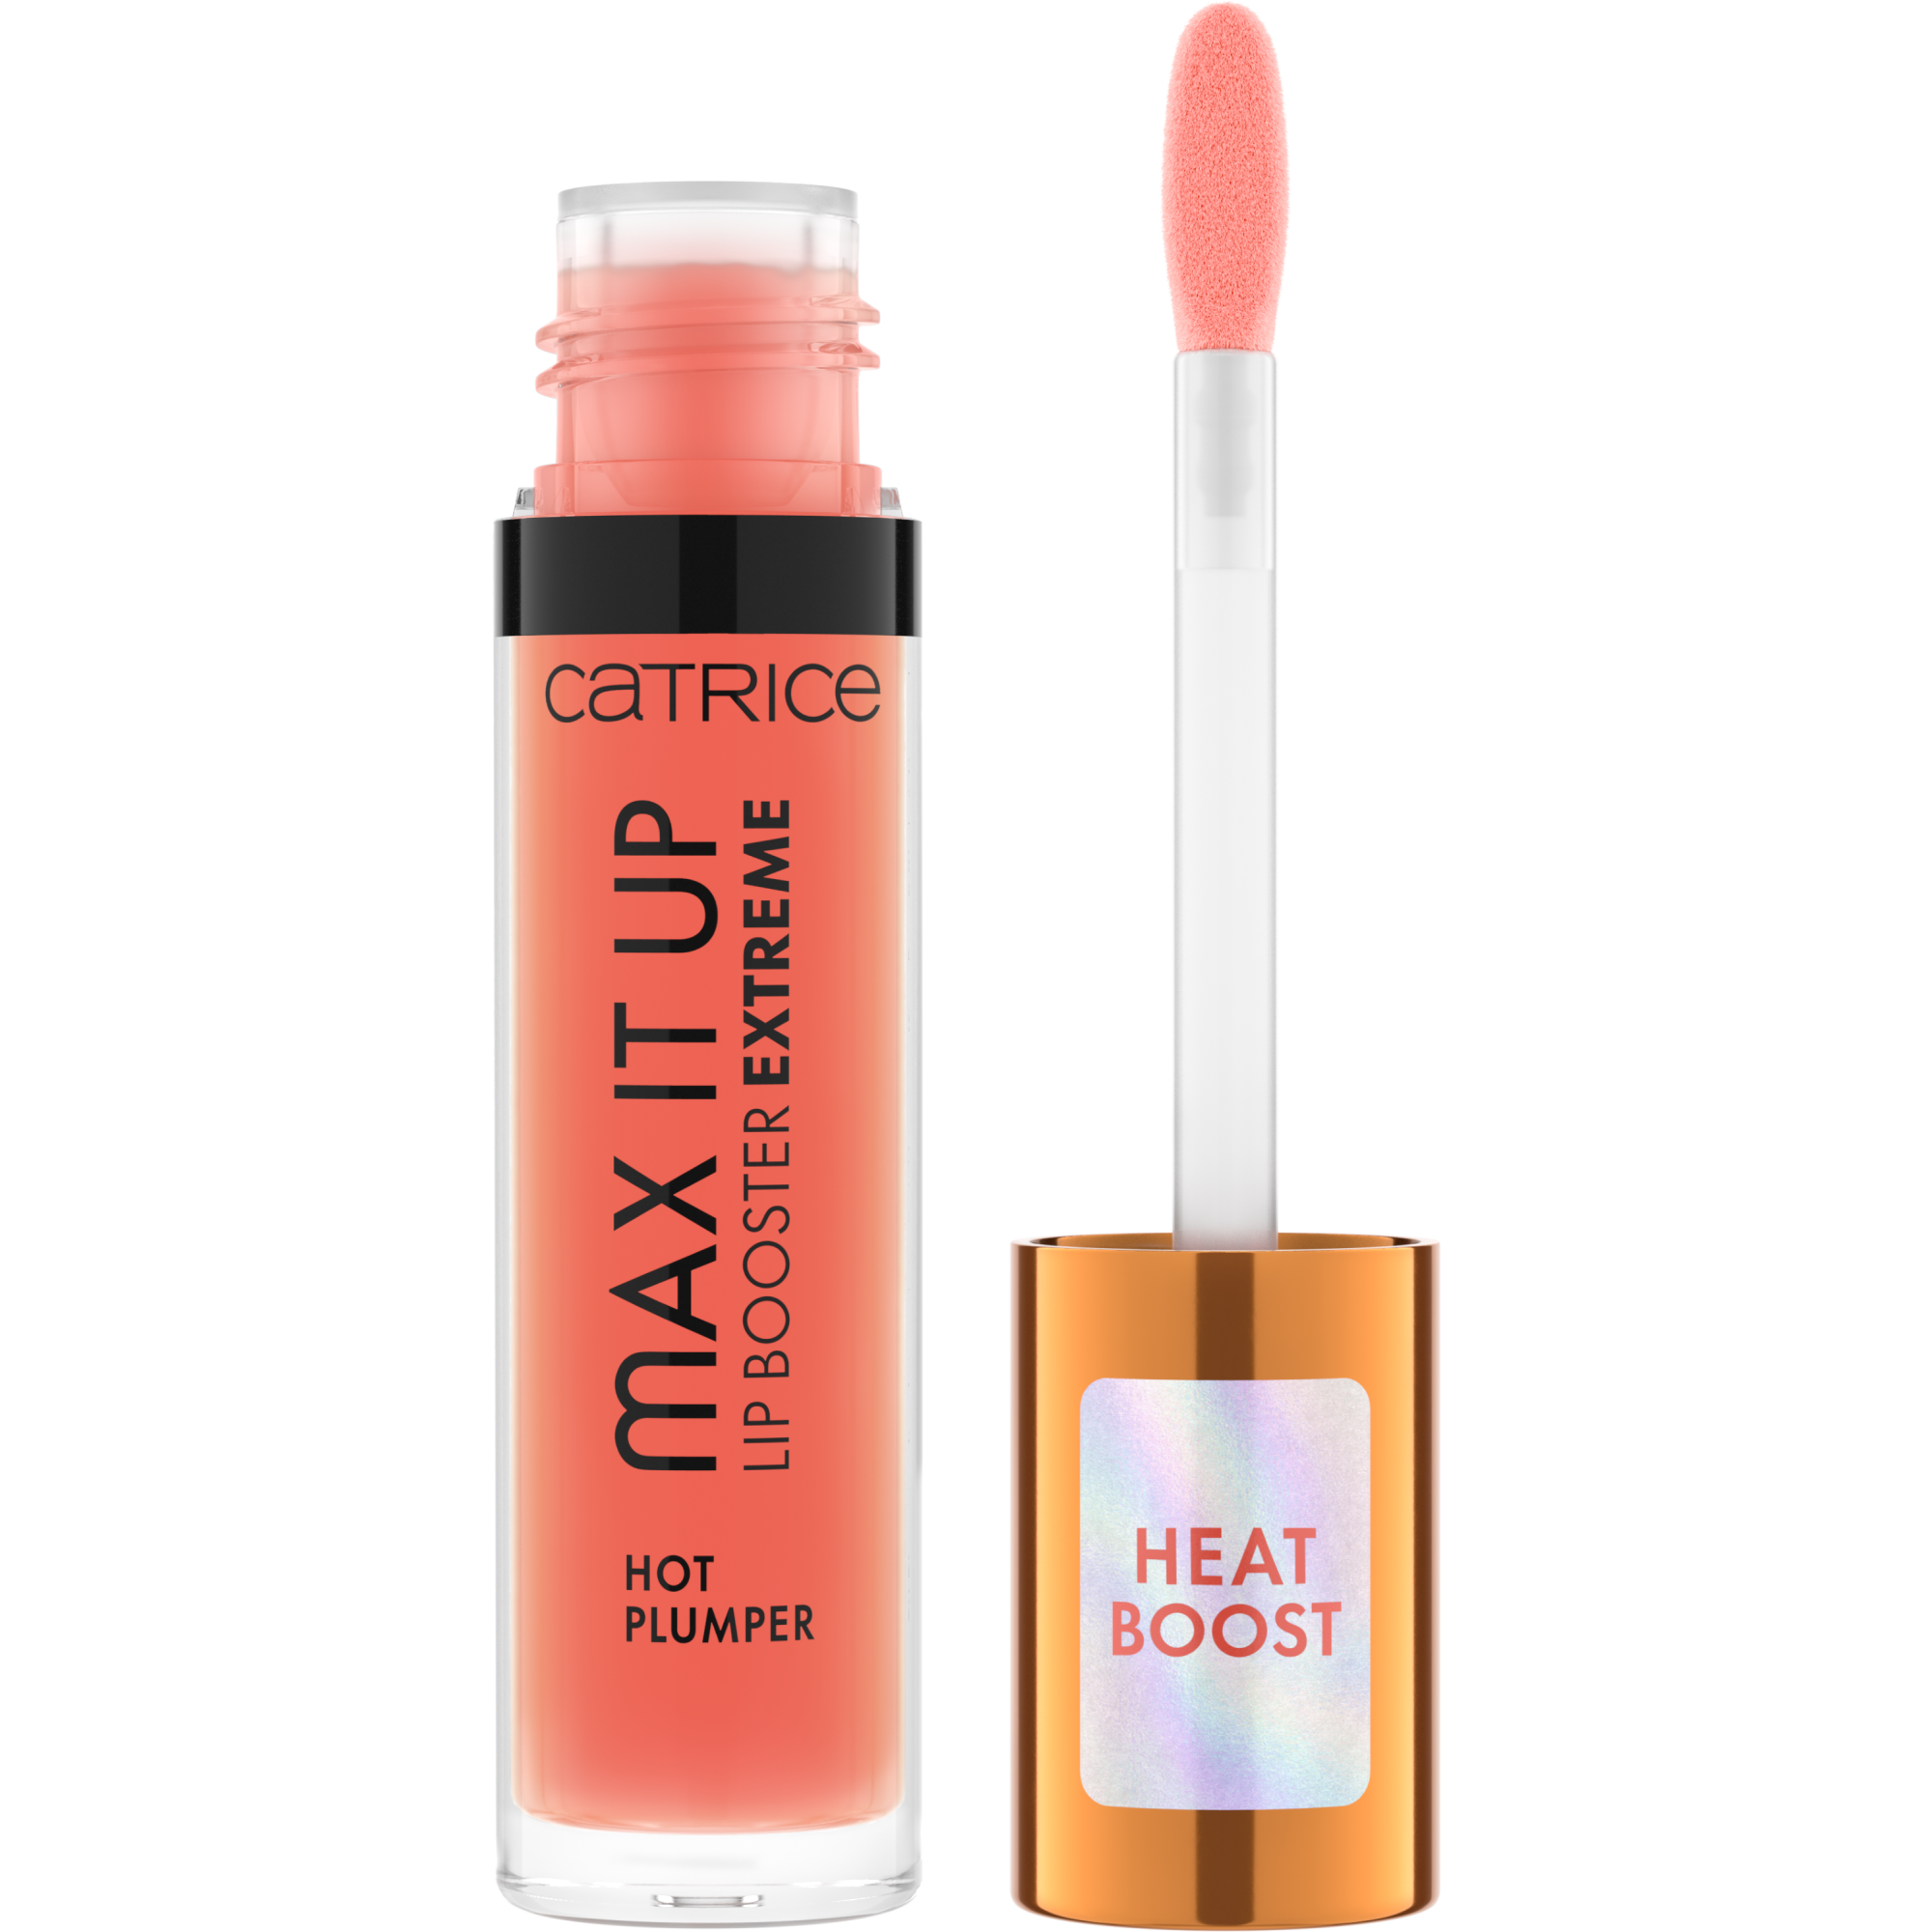 Max It Up Lip Booster Extreme